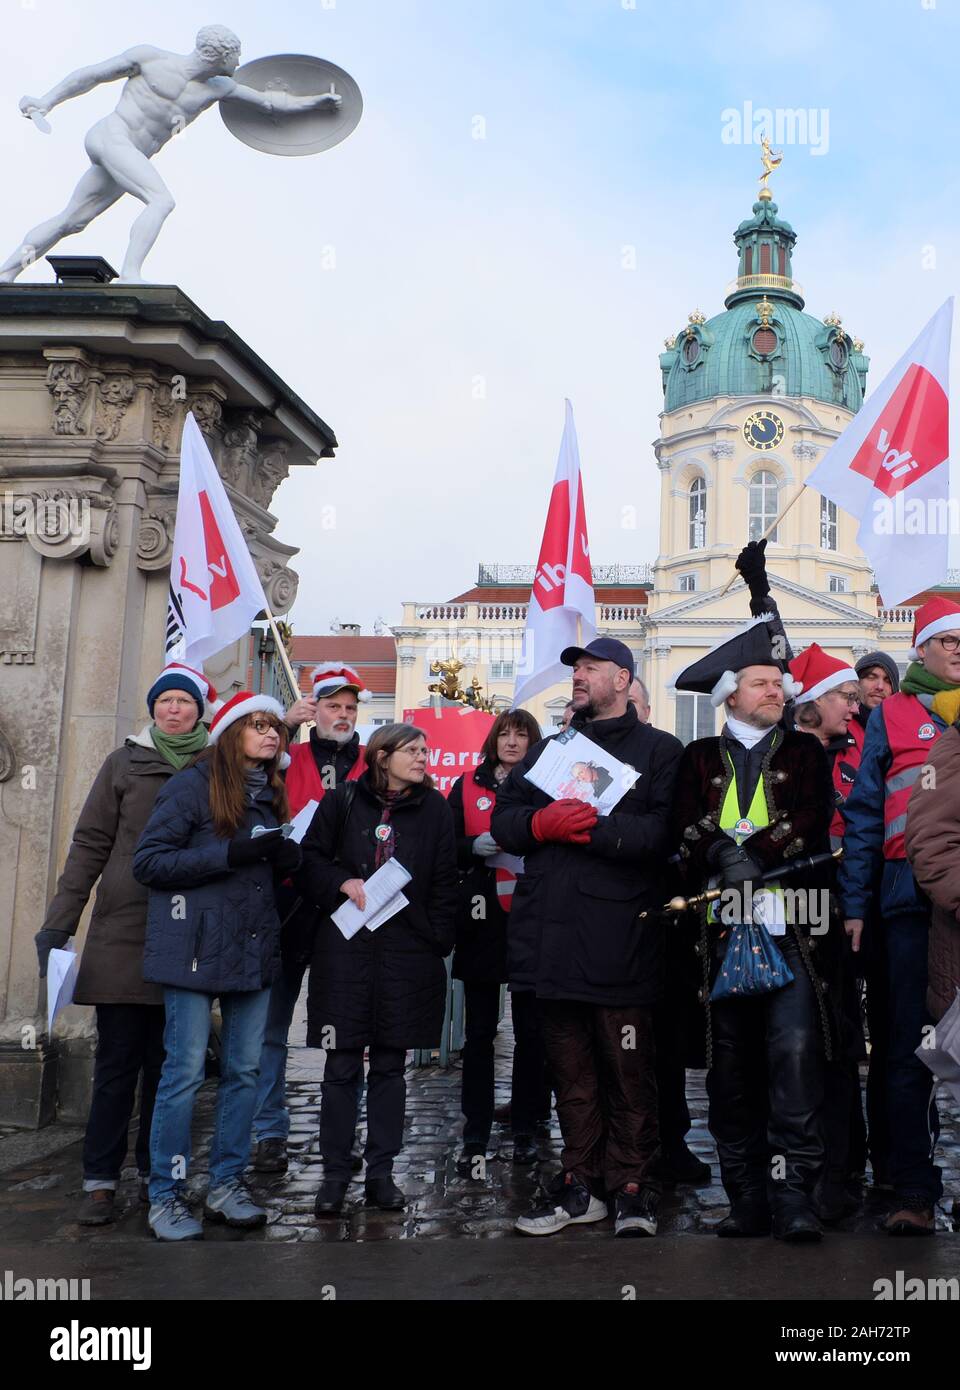 Picket at Schloss Charlottenburg, Boxing Day, 2019. Protest by palace workers over terms and conditions of employment. Stock Photo